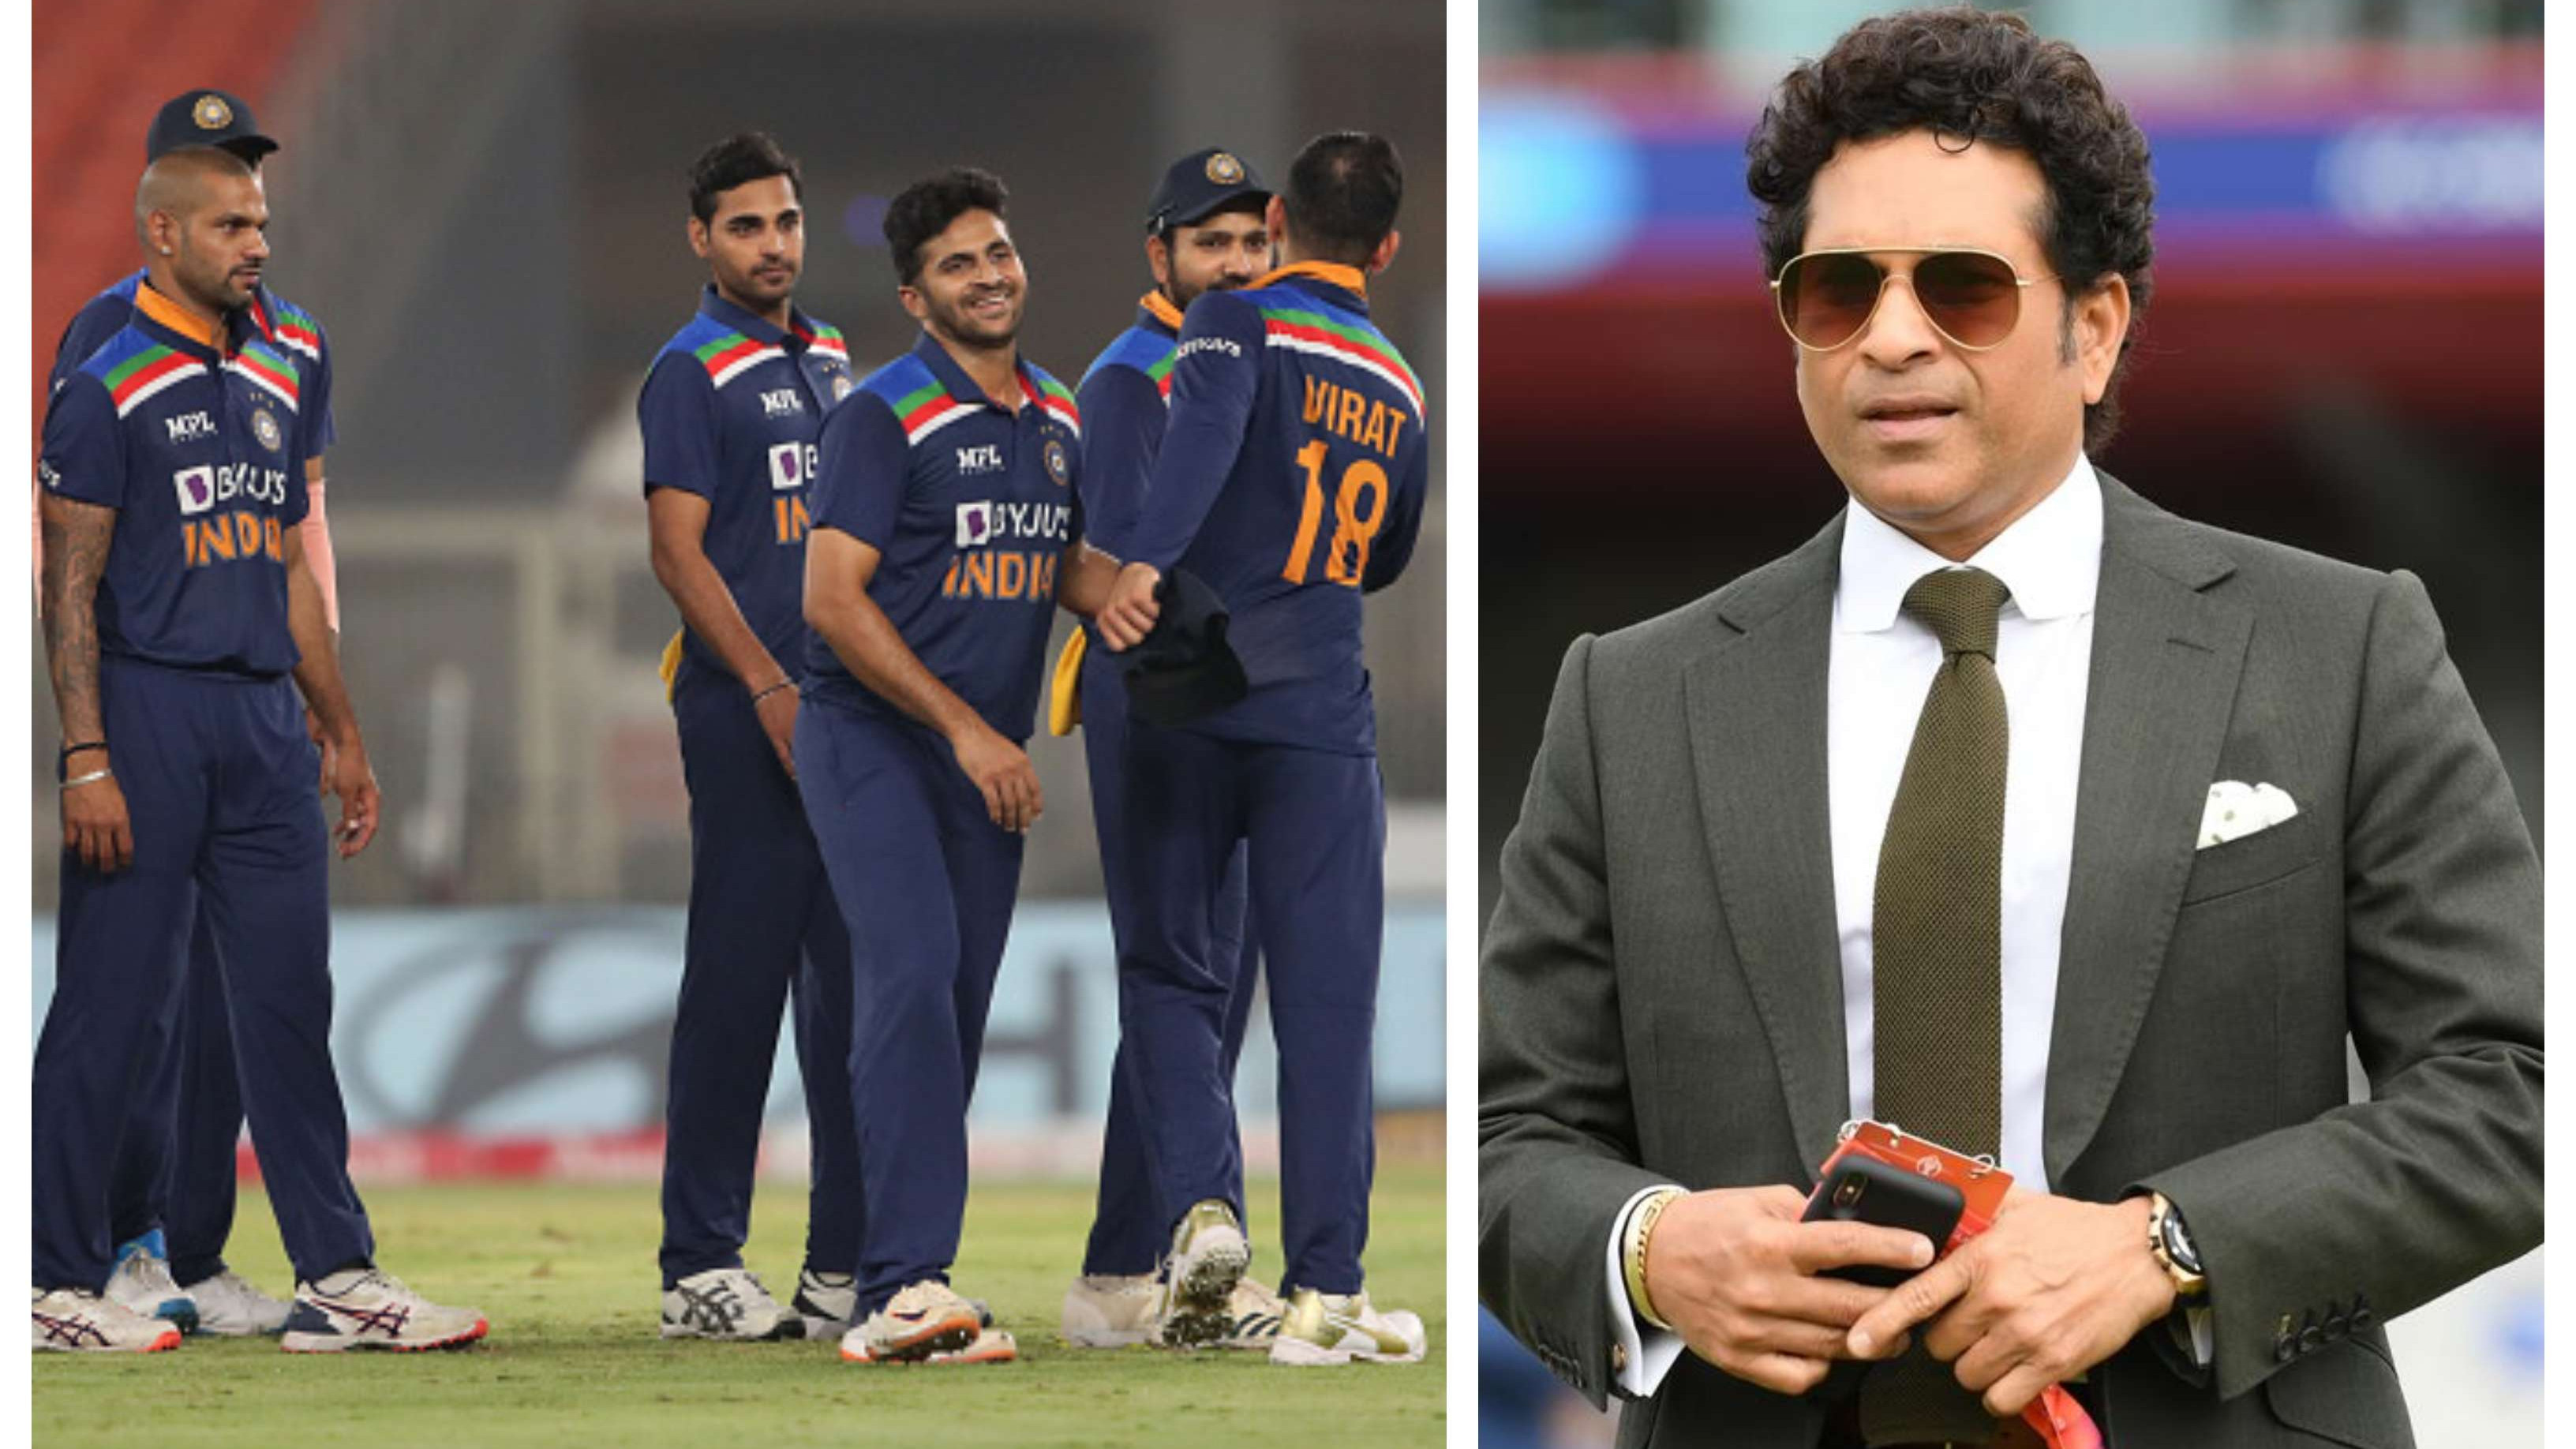 Sachin Tendulkar asks selectors to pick India’s best squad for T20 World Cup irrespective of age